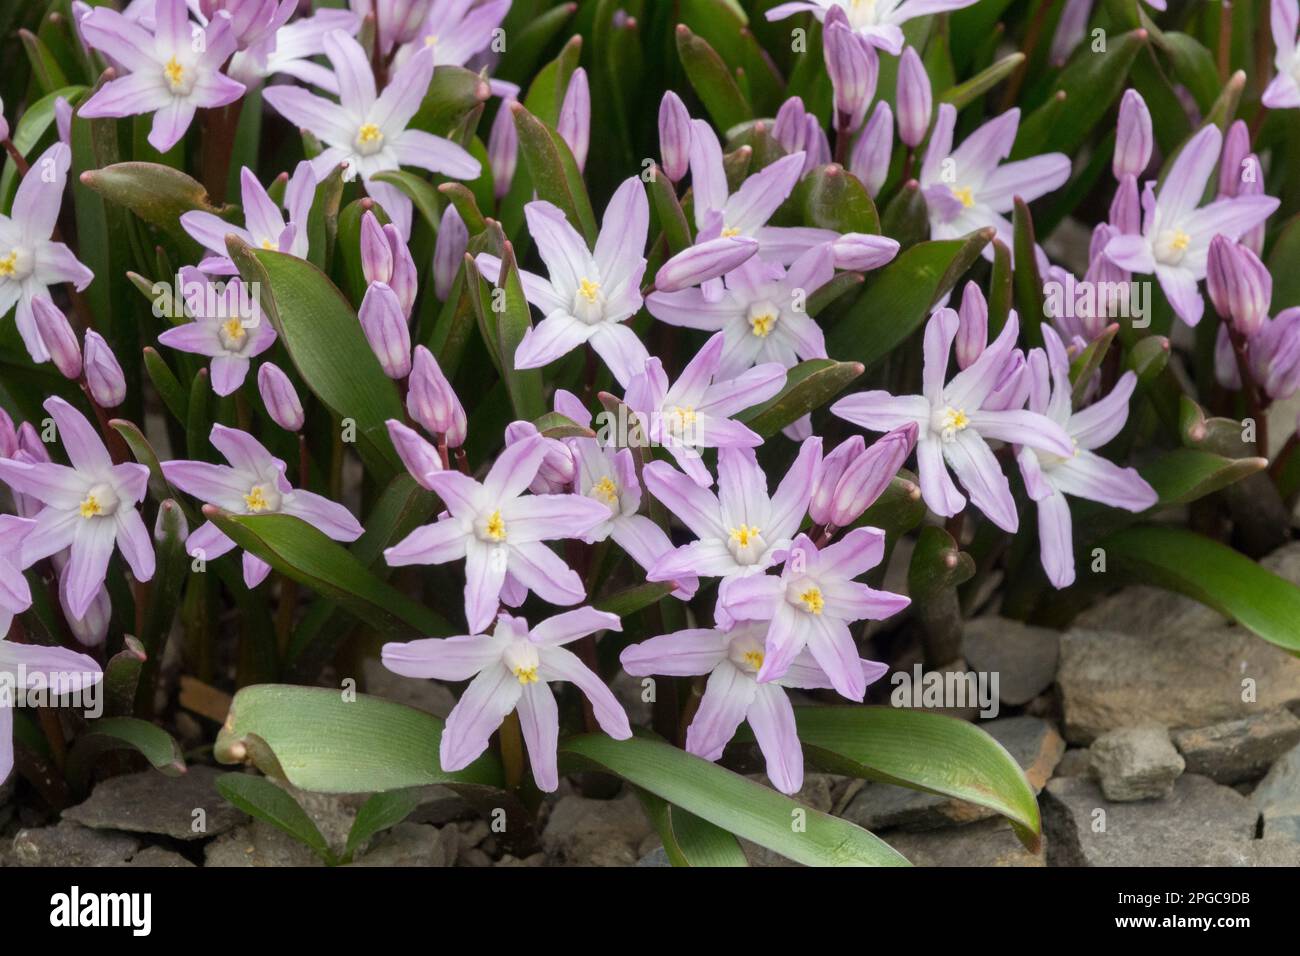 Glory-of-the-snow, Scilla forbesii 'Pink Giant', Early spring, Rockery, Garden, Hardy, Perennial, Low, Plant, Scilla 'Pink Giant' Stock Photo